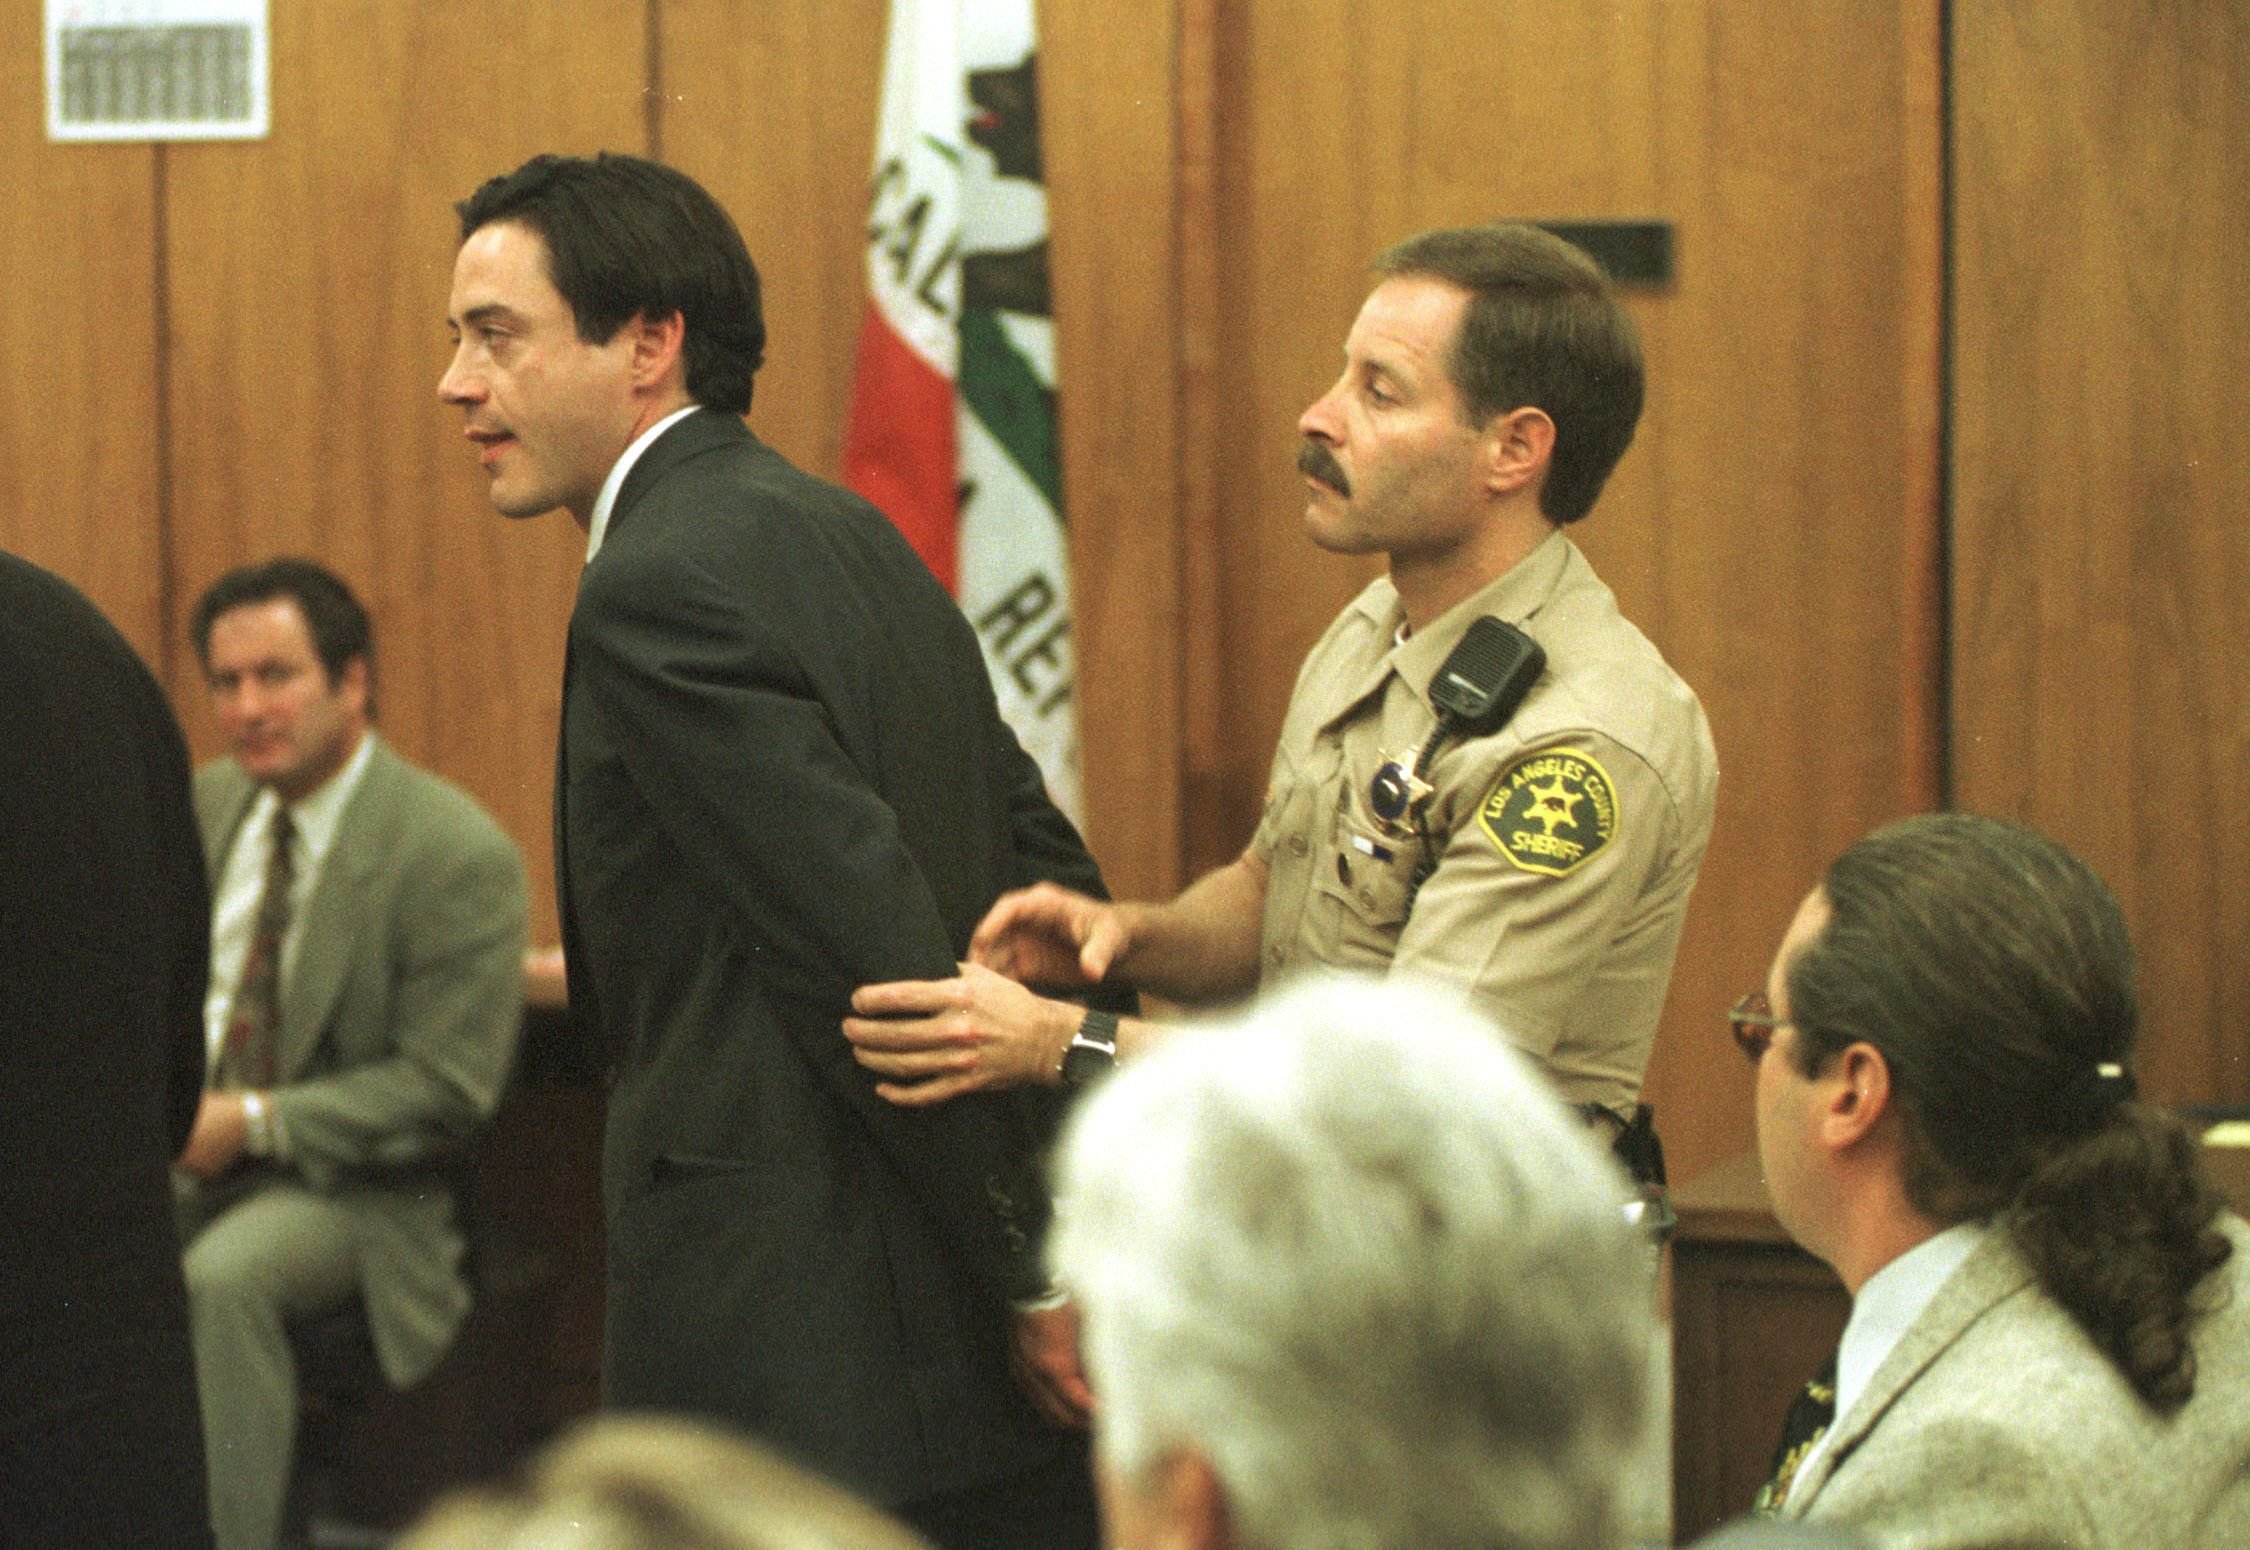 Robert Downey Jr. in custody after being charged with possession of cocaine in1997 in Malibu, CA | Source: Getty Images